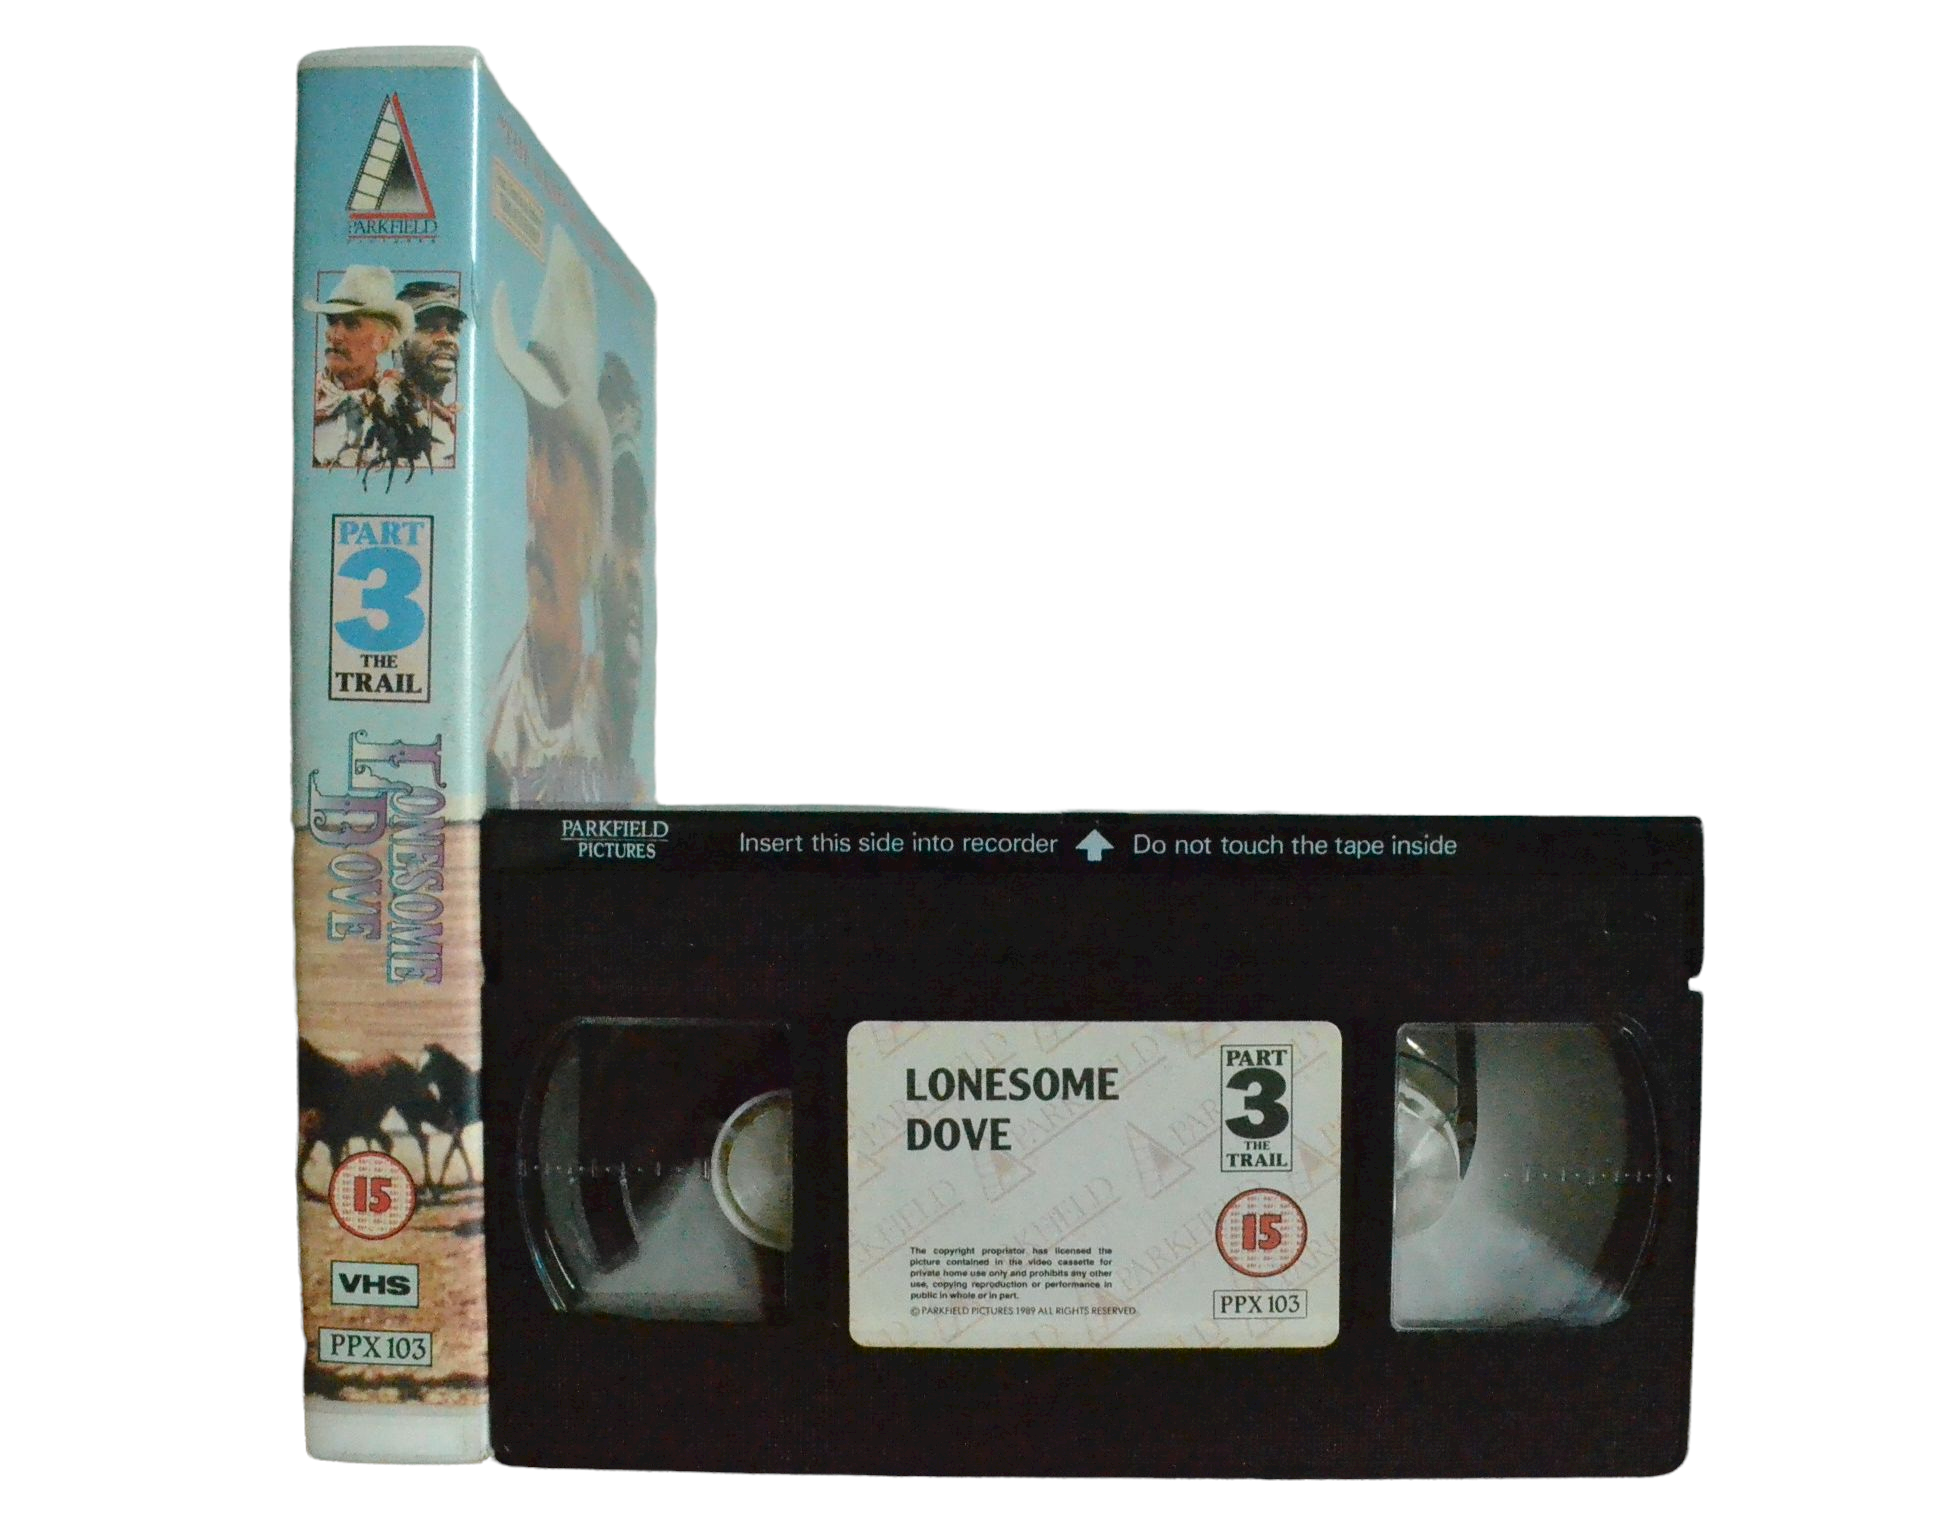 Lonsesome Dove - Part 3 - Robert Duvall - Parkfield - Vintage - Pal VHS-